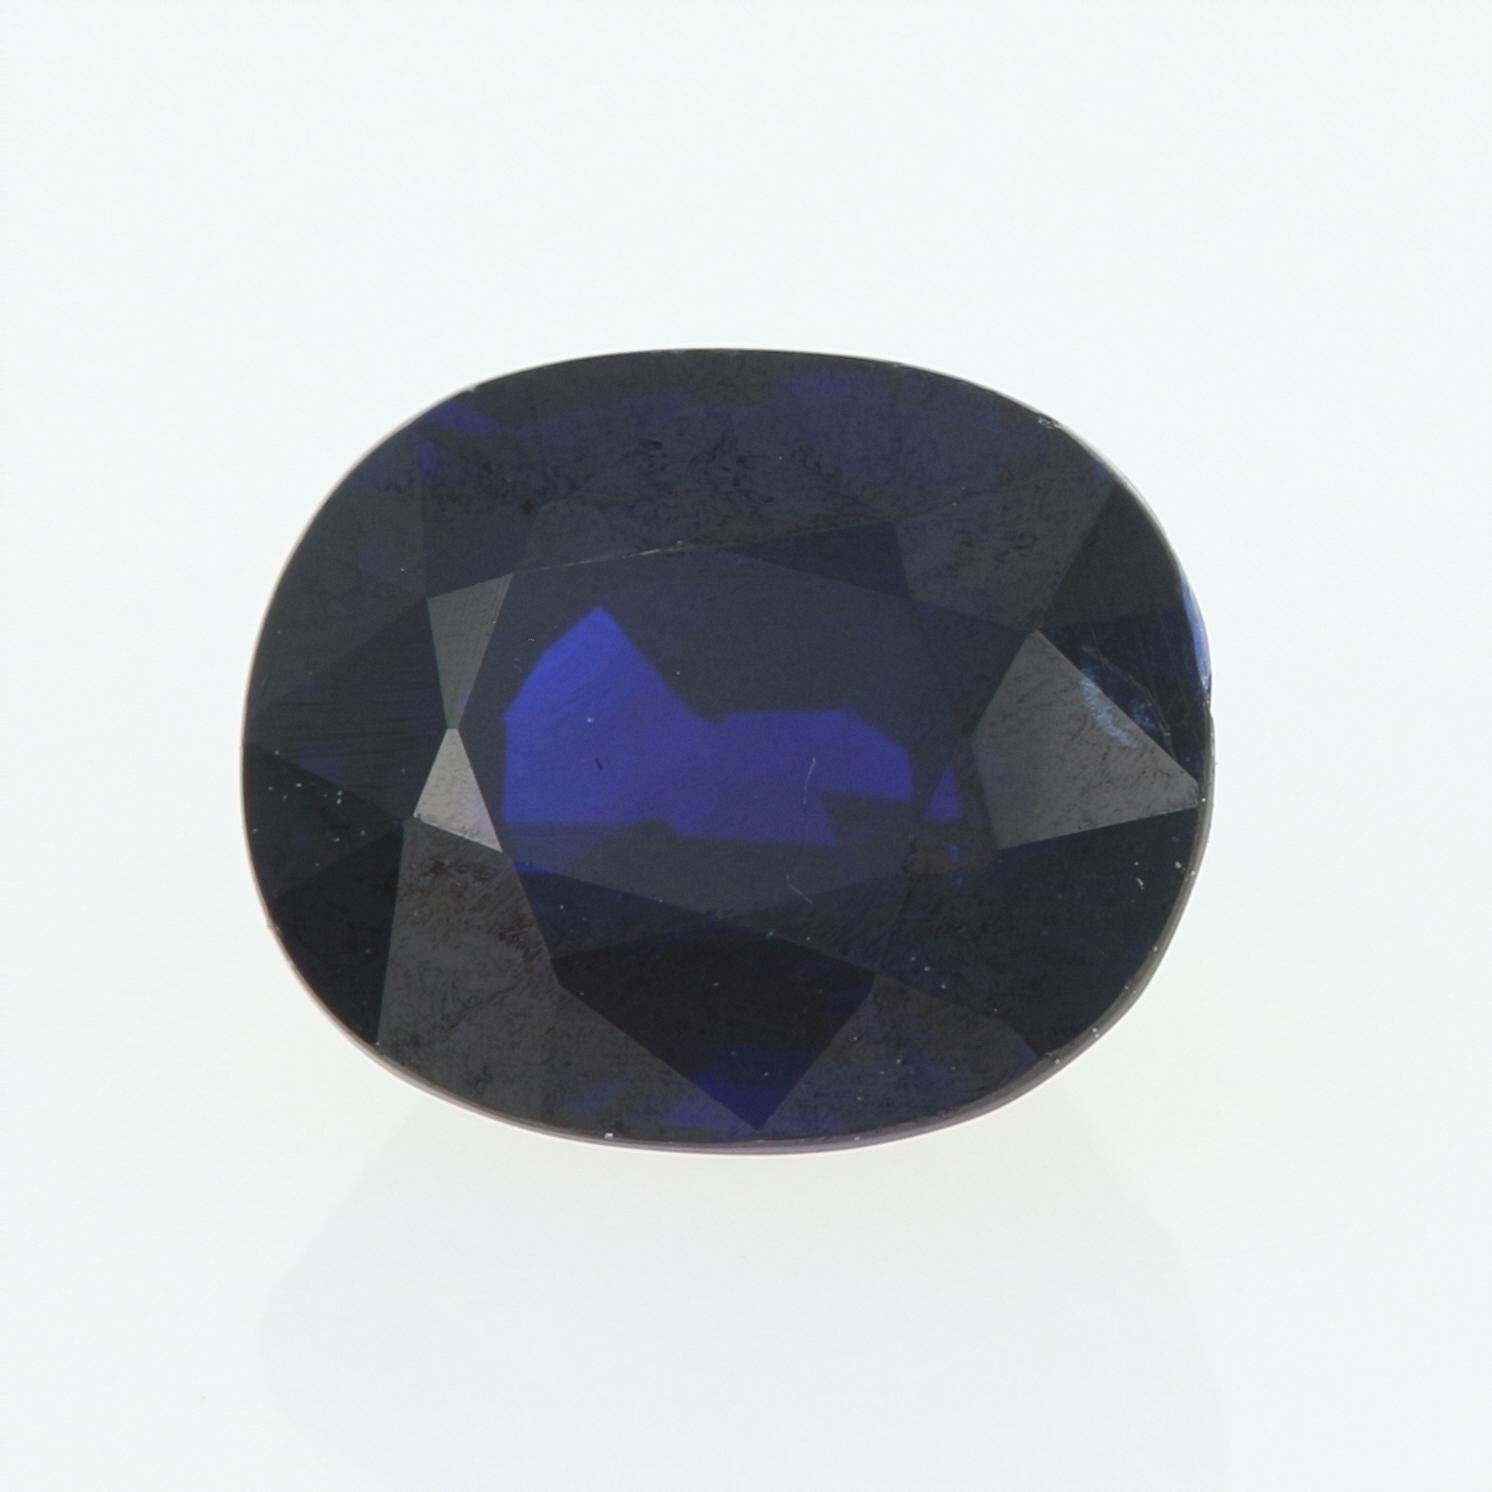 Women's or Men's 1.15ct Sapphire Gemstone - Oval Cut Blue Loose Solitaire For Sale